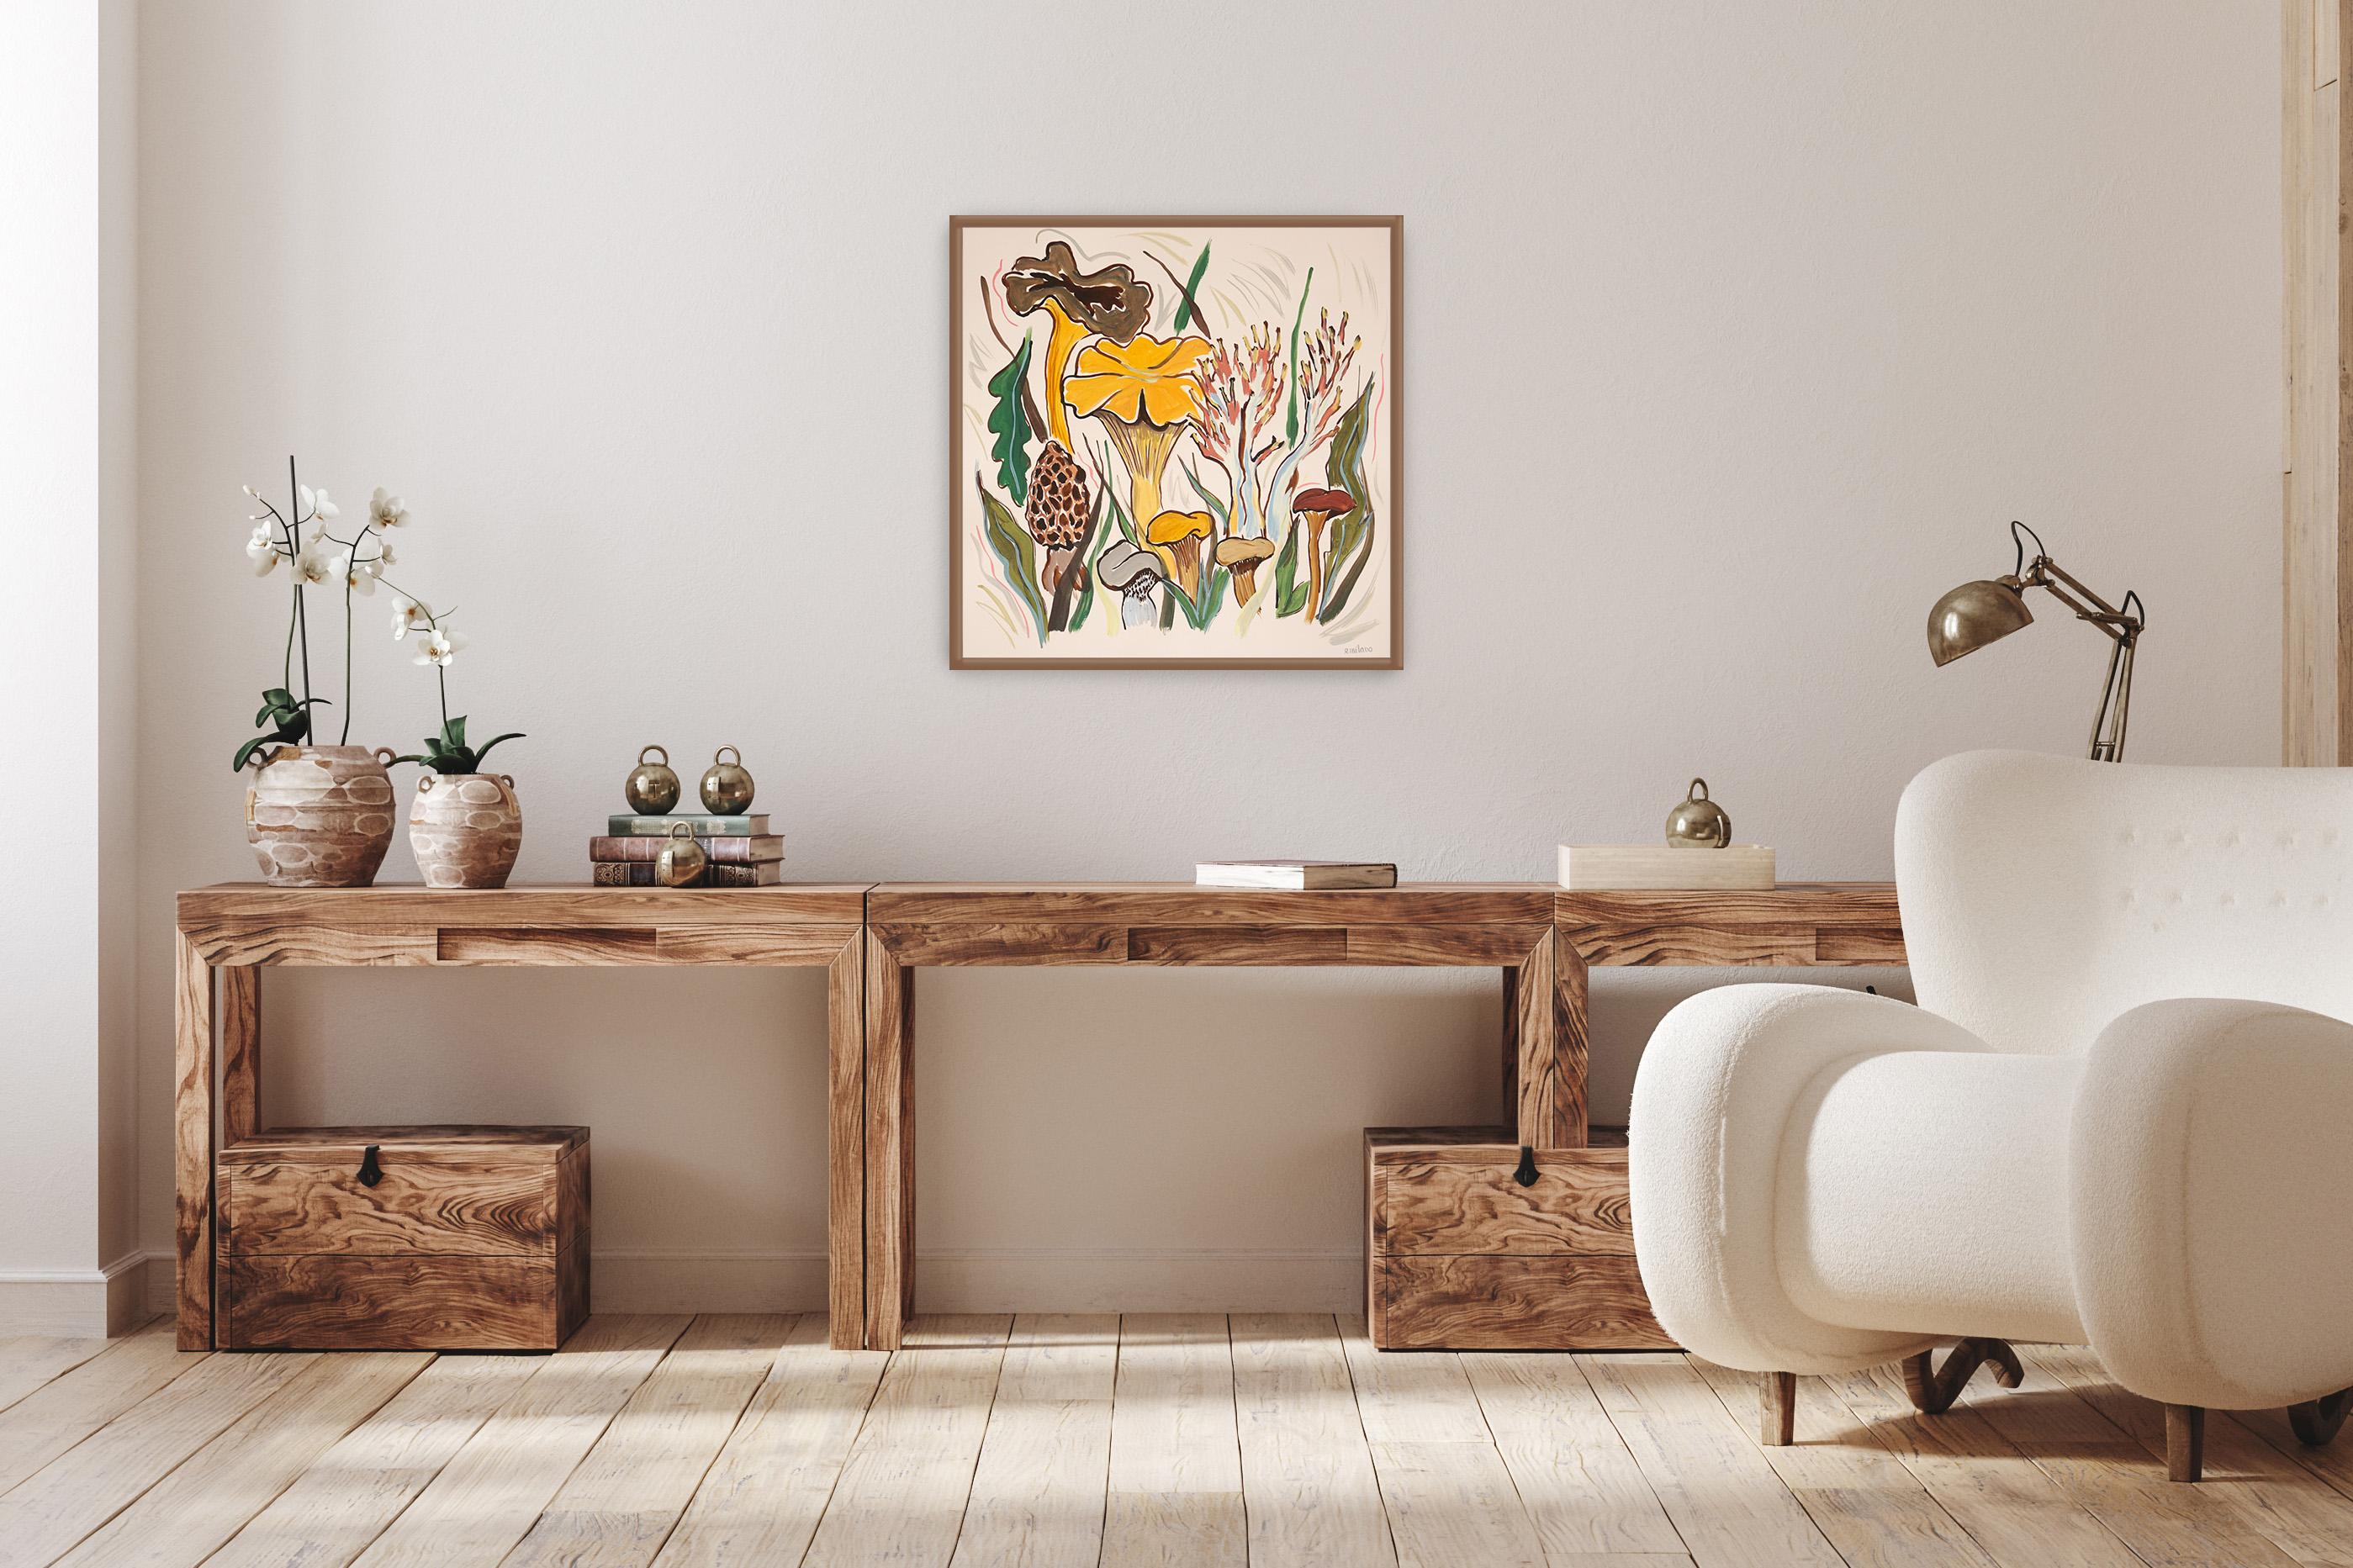 Wild Mushrooms Harvest , Earth Tones Squared Landscape, Illustration Style Brown - Naturalistic Painting by Romina Milano